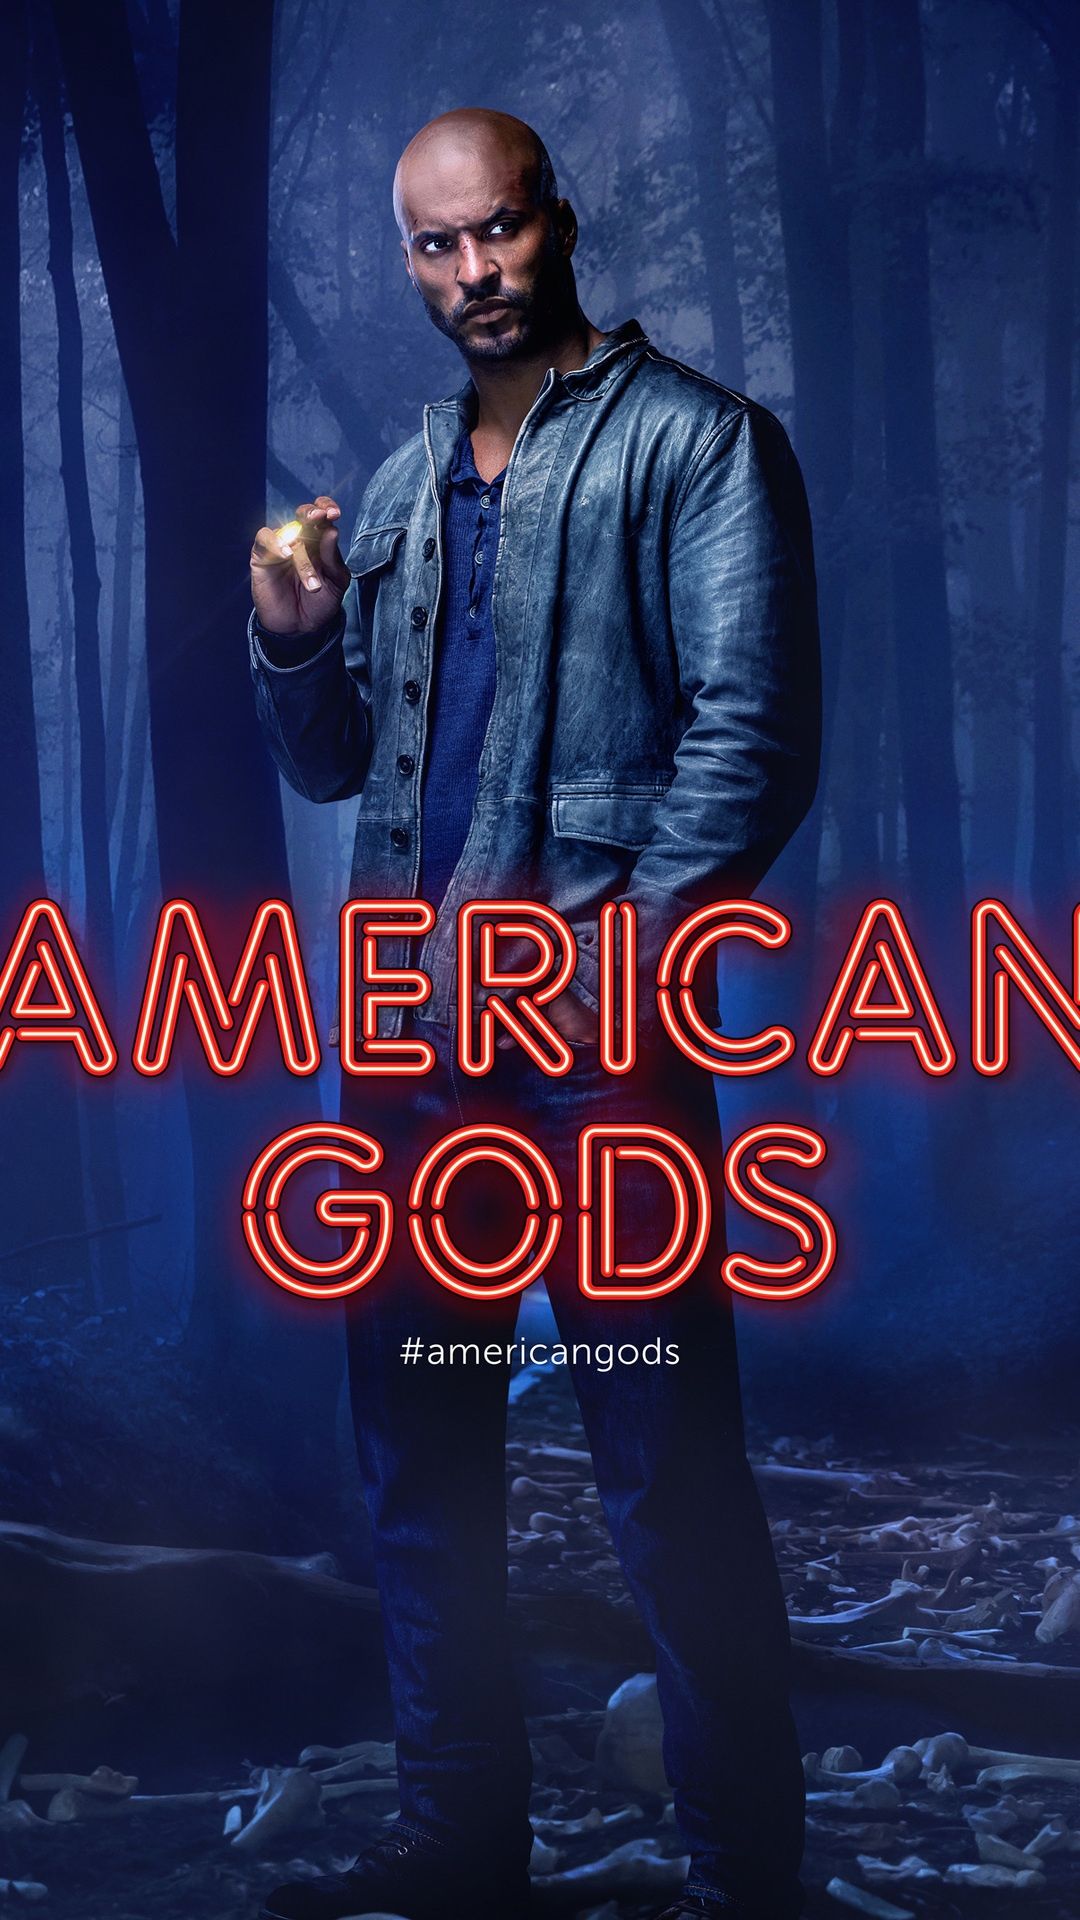 American Gods phone wallpaper, Exclusive design, Personalize your device, Unique, 1080x1920 Full HD Phone